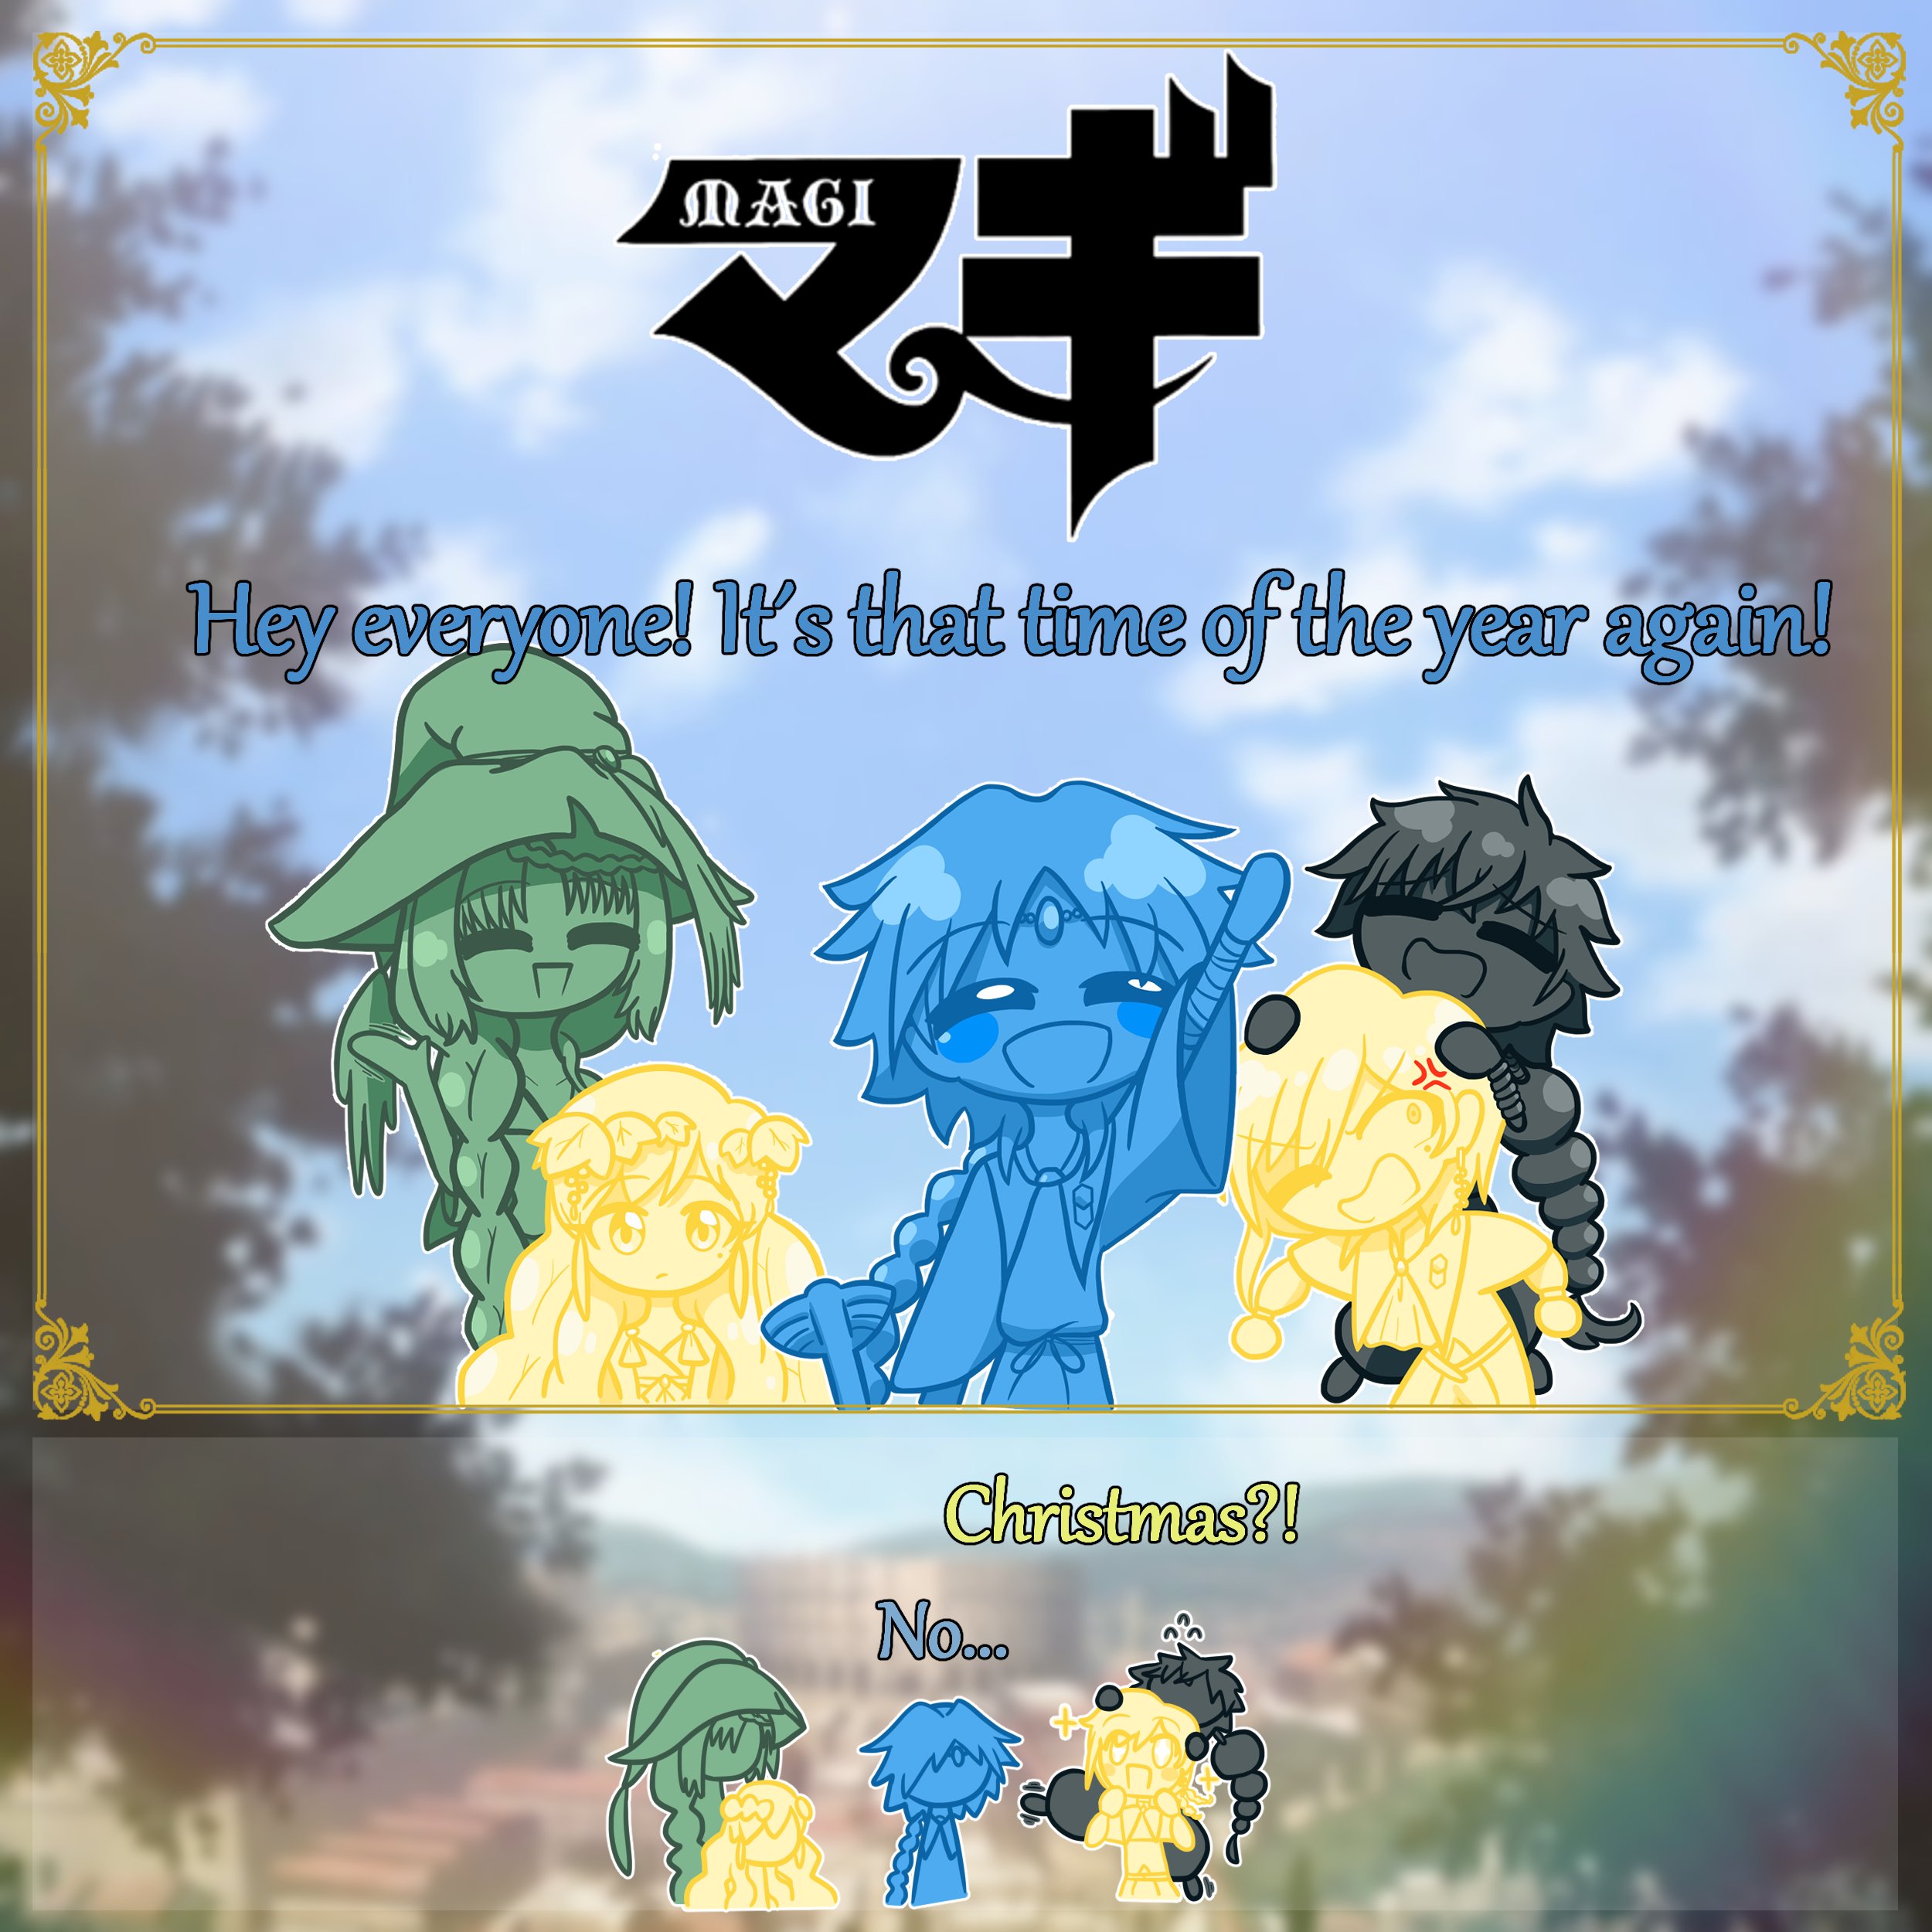 Mlp Diamond Rose Fellow Magi Fans It S Time We Ll Be Having The Magi Event This Year As Well Make Sure To Share This Around So More Fans See It ᴗ